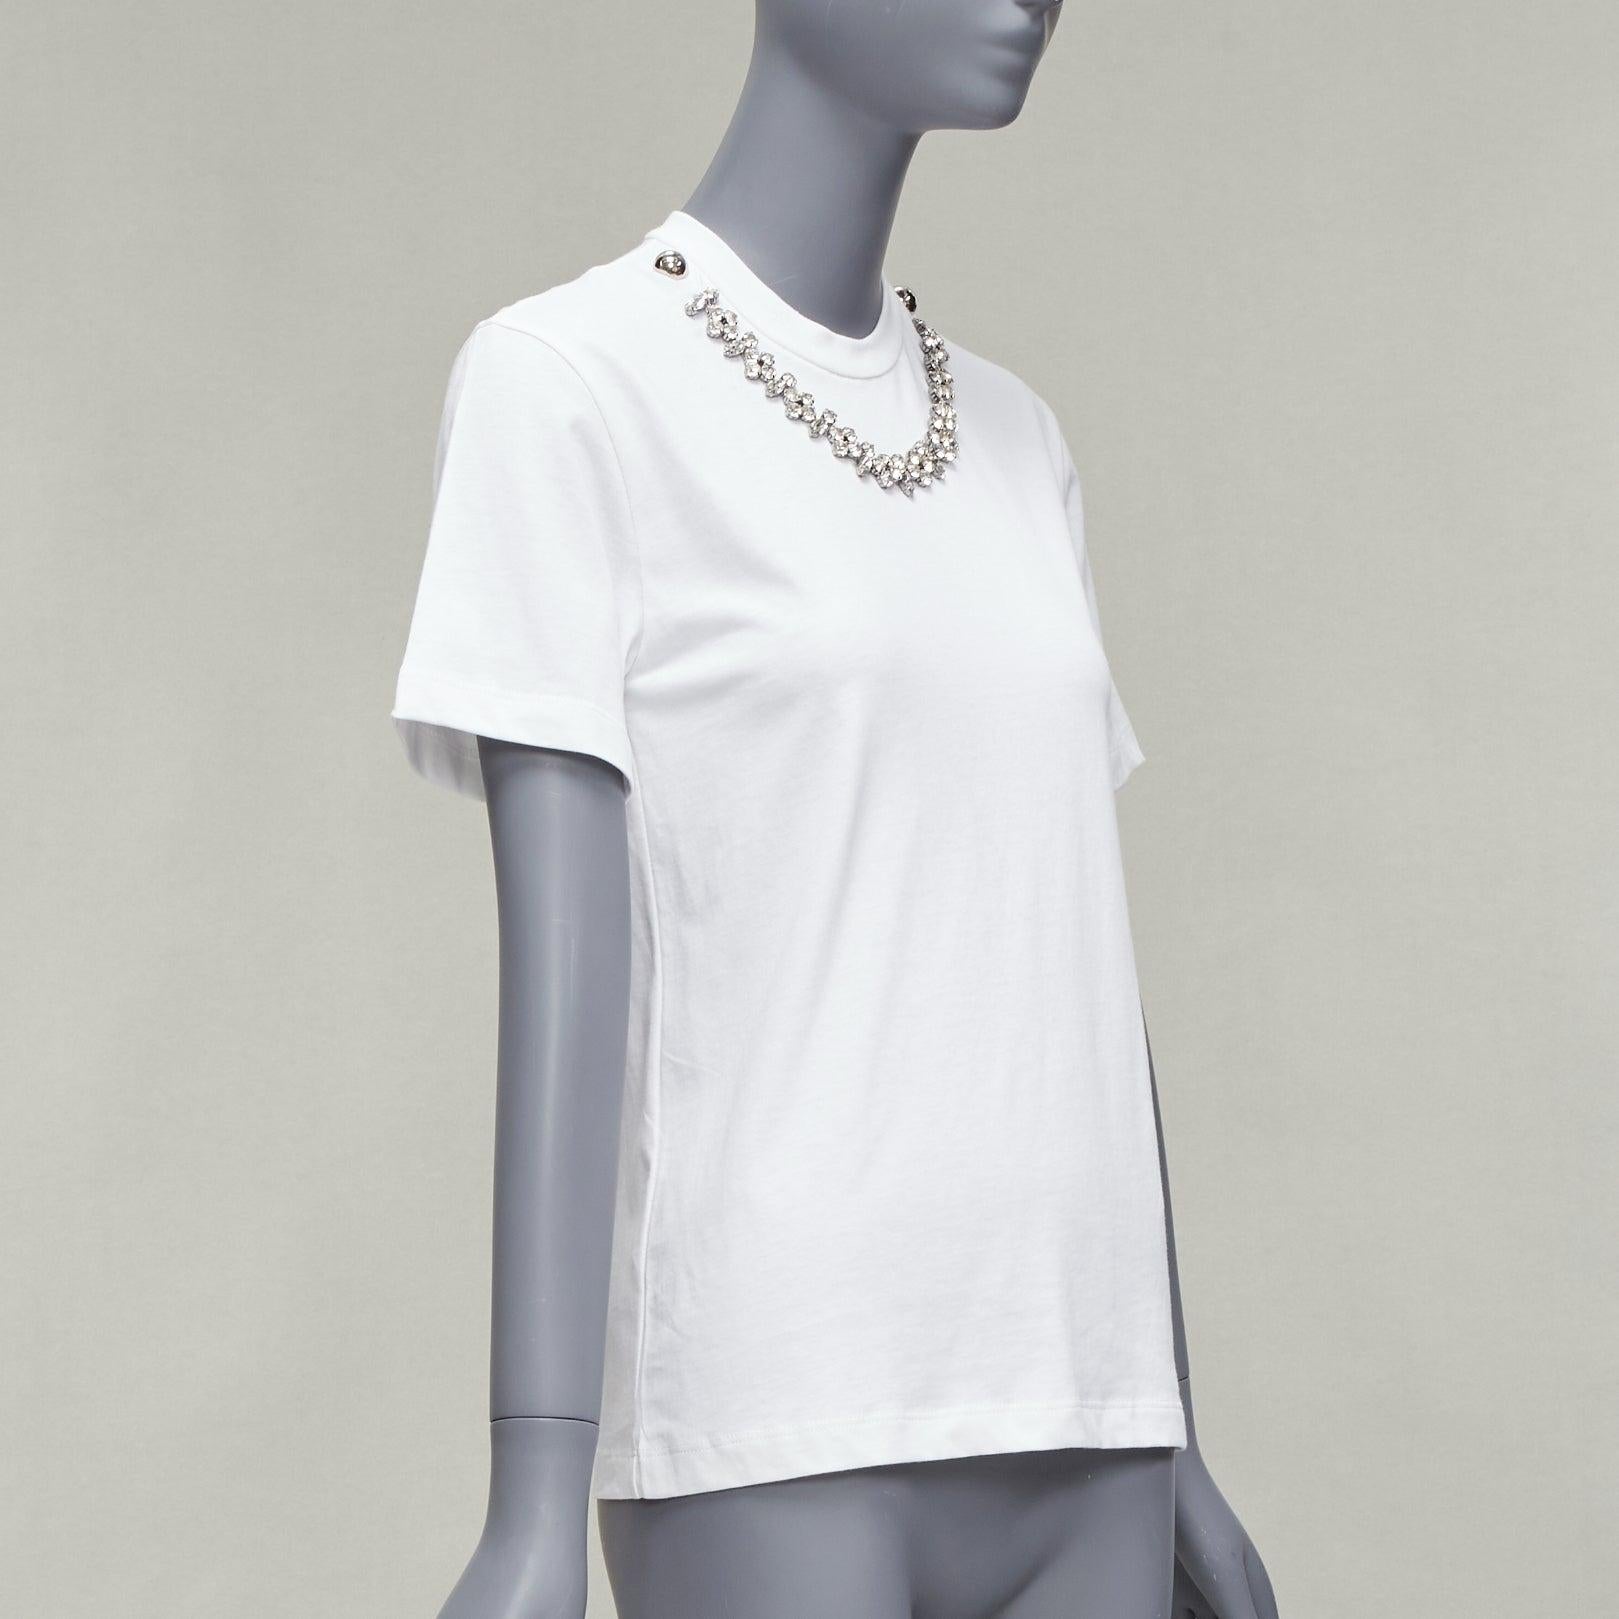 CHRISTOPHER KANE crystal rhinestone dome stud necklace white cotton tshirt XS In Excellent Condition For Sale In Hong Kong, NT